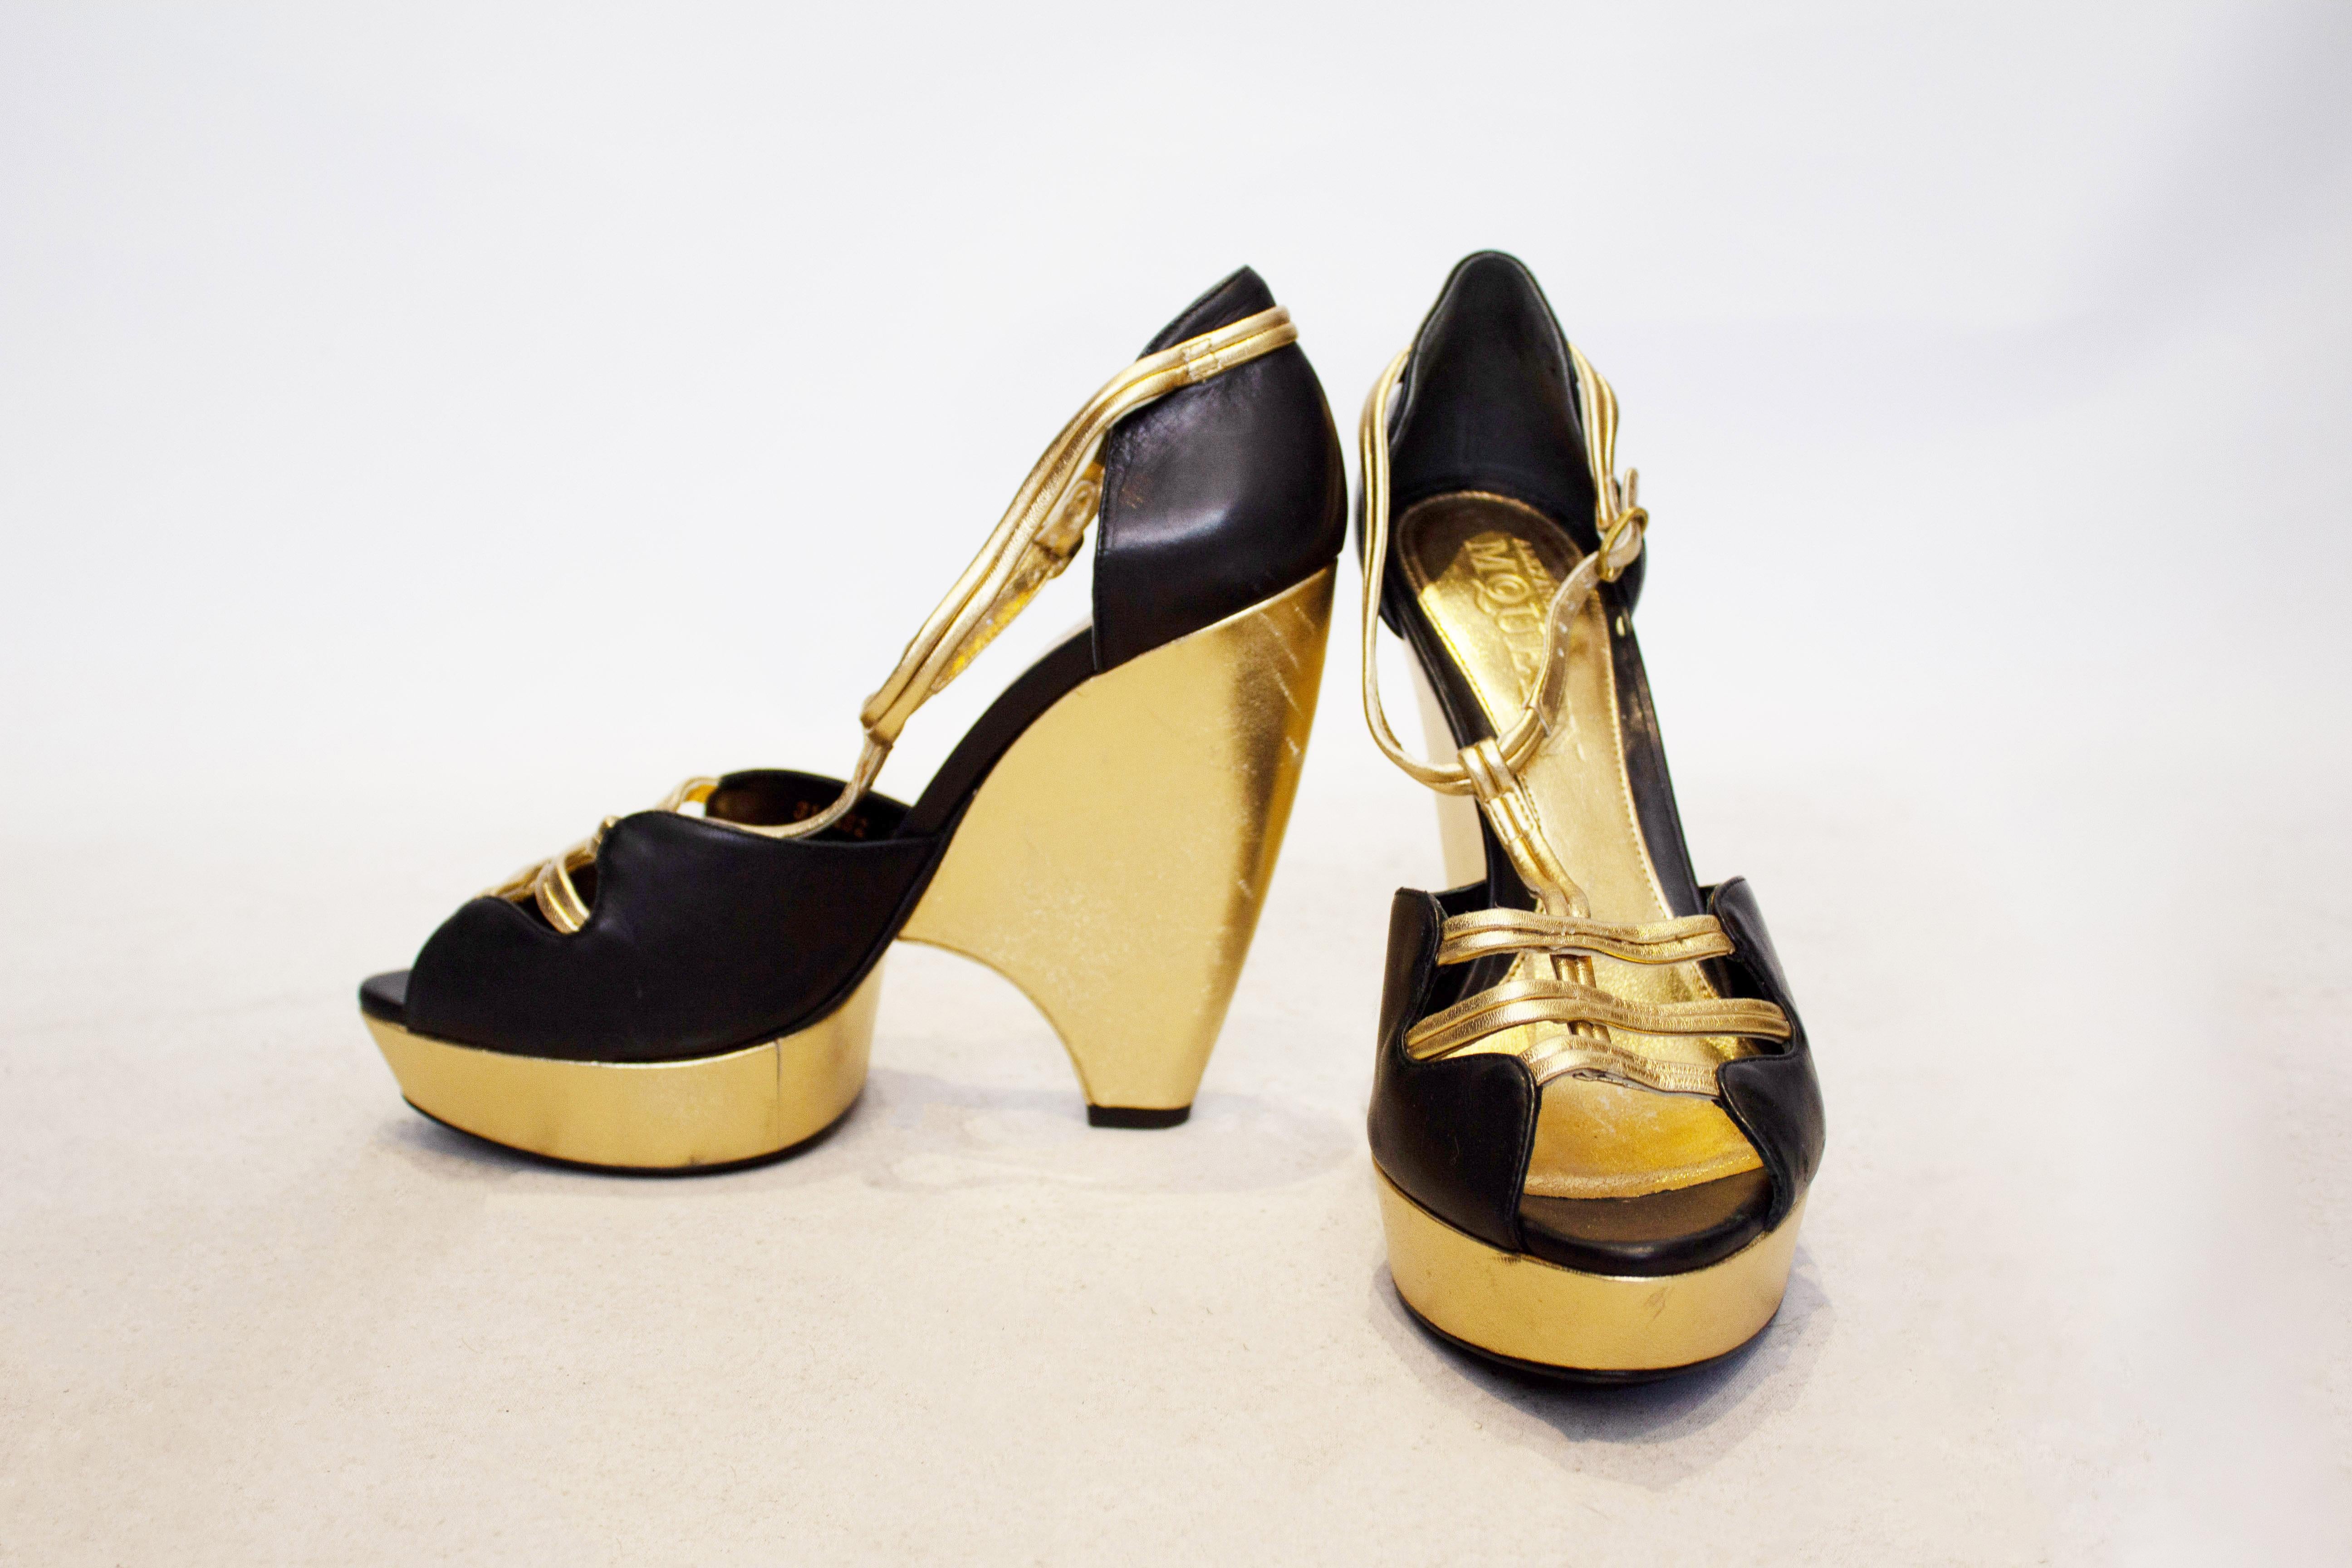 A head turning pair of shoes by Alexander Mcqueen.  The shoes have a gold wedge , with black uppers and gold leather detail. The heel height is 5 1/2 '' and they are marked size 39.